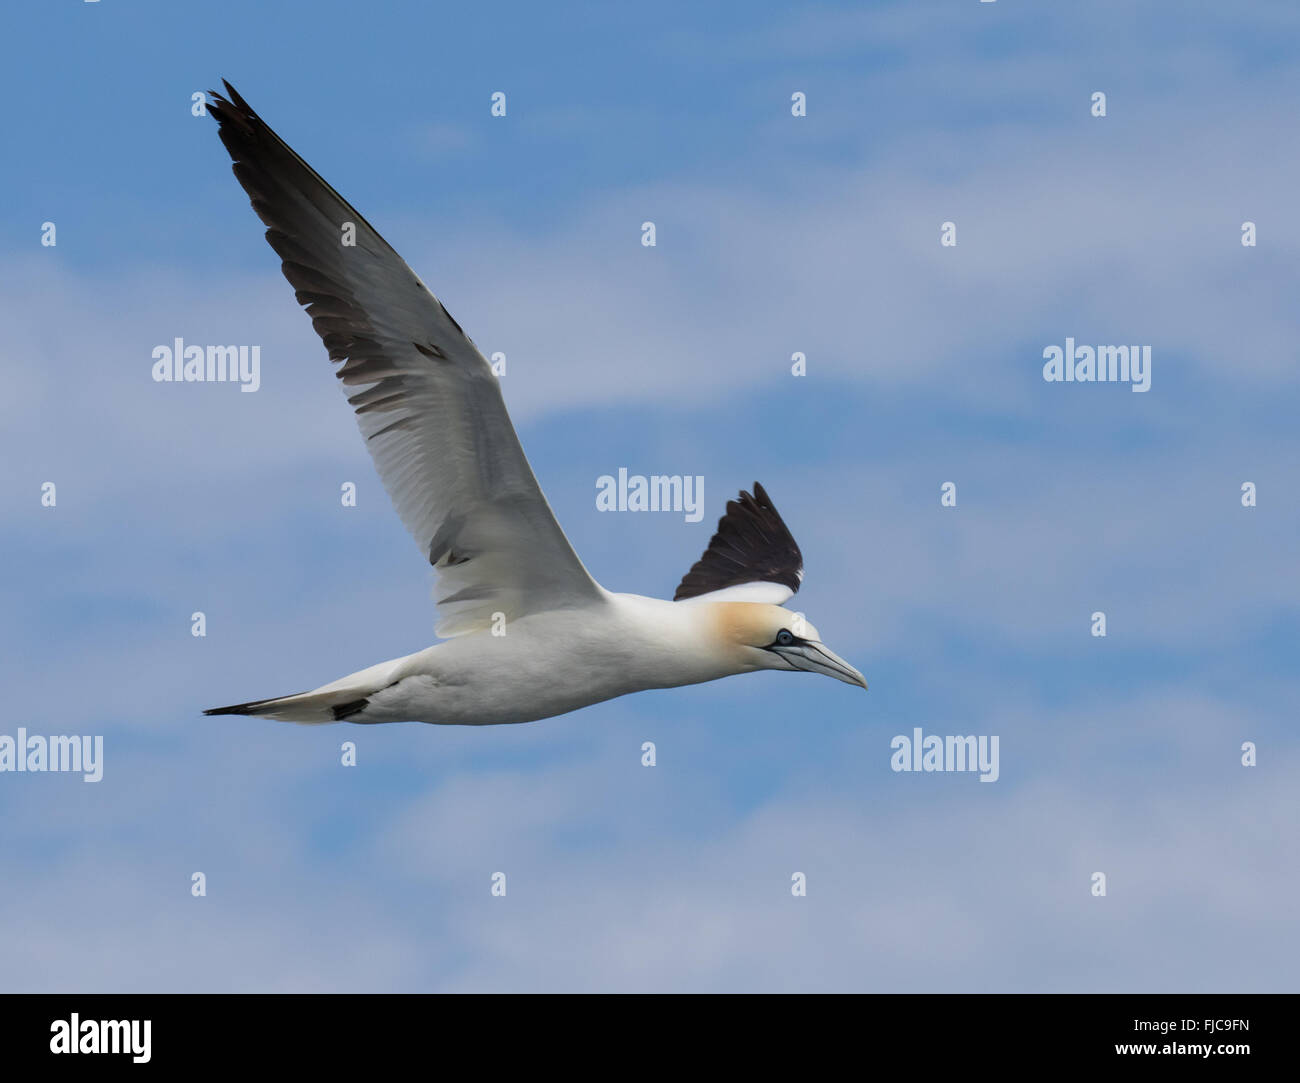 Northern Gannet taken on pelagic seabird trips from Isles of Scilly, Cornwall on board the Sapphire Stock Photo